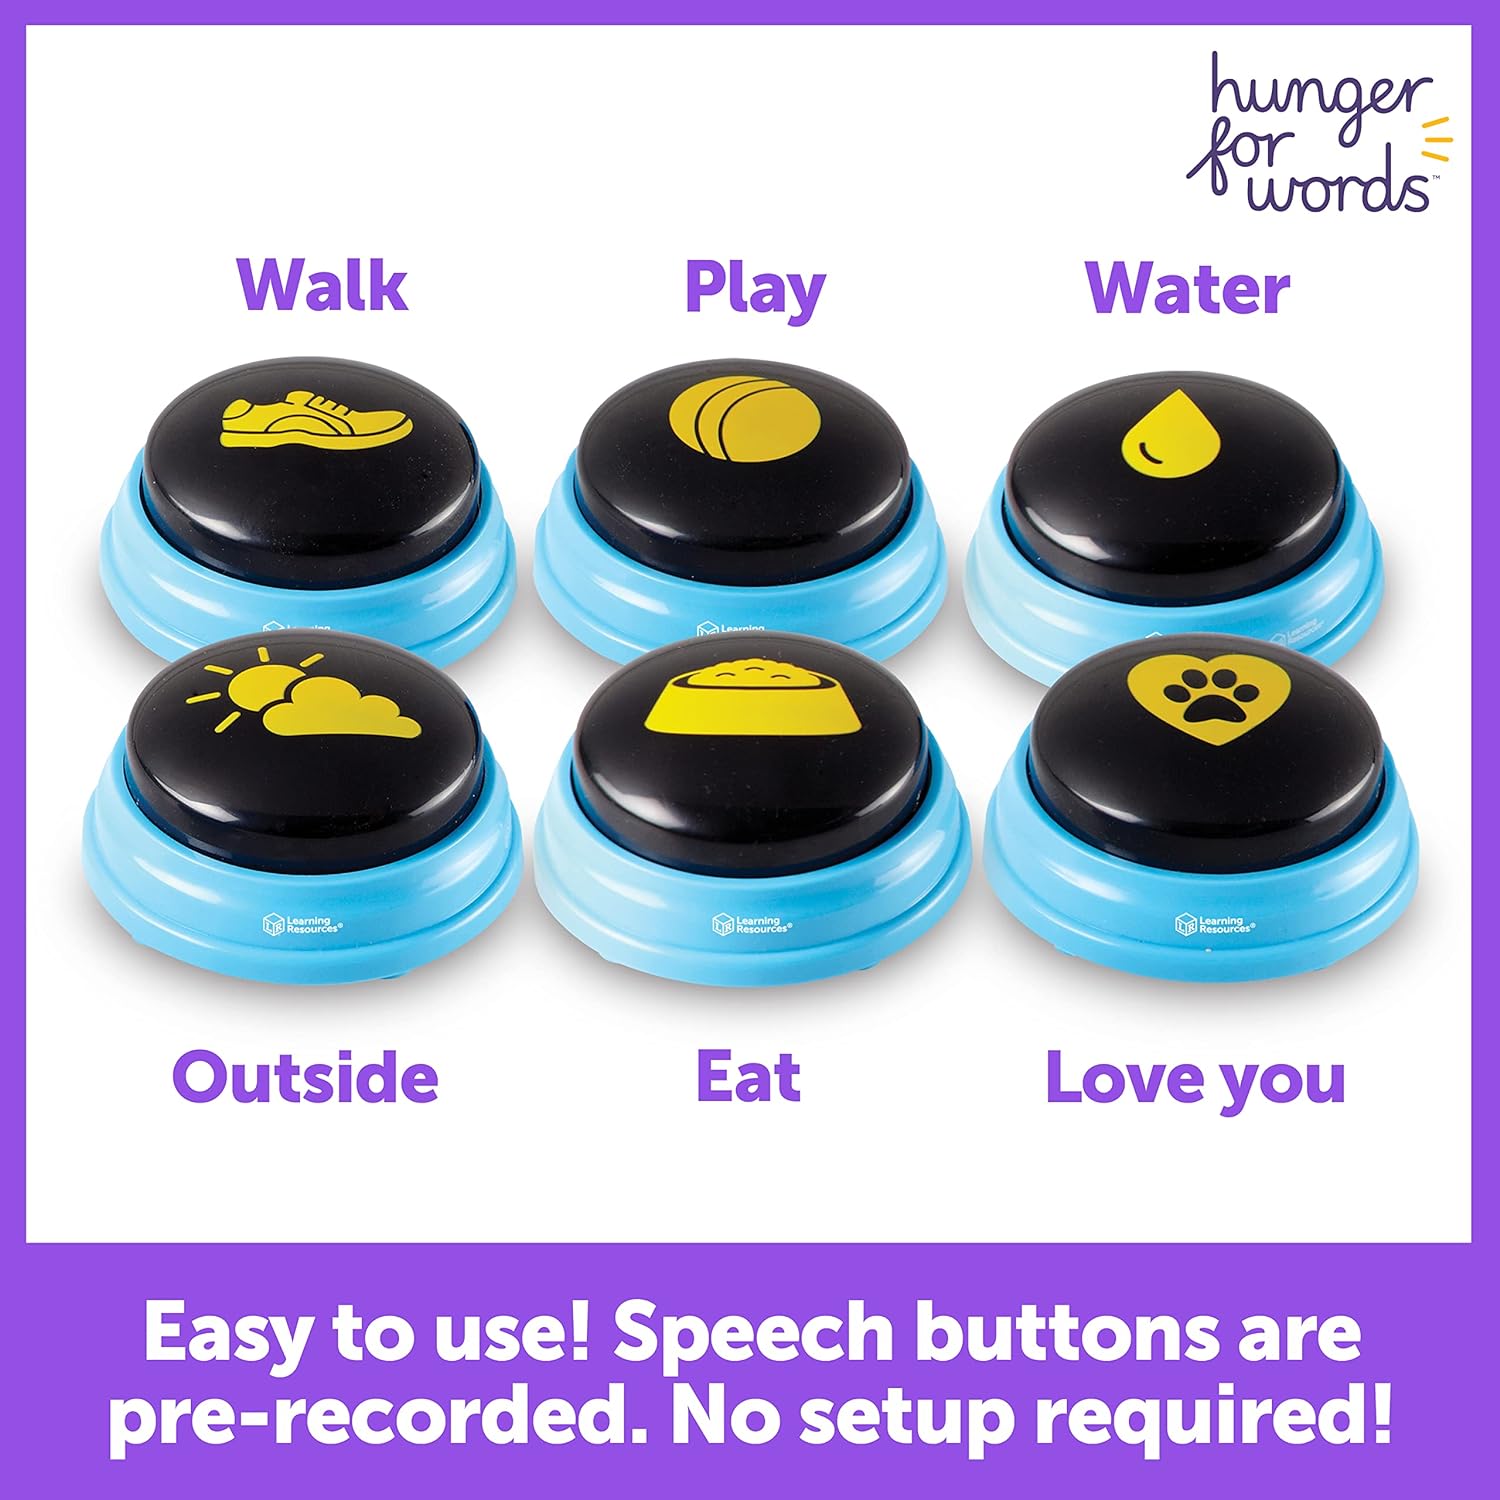 Hunger For Words Talking Pet Essential Words - 6 Piece Set Pre-Recorded Speech Buttons for Dogs, Talking Dog Buttons, Perfect for Dog Training and Obedience Games